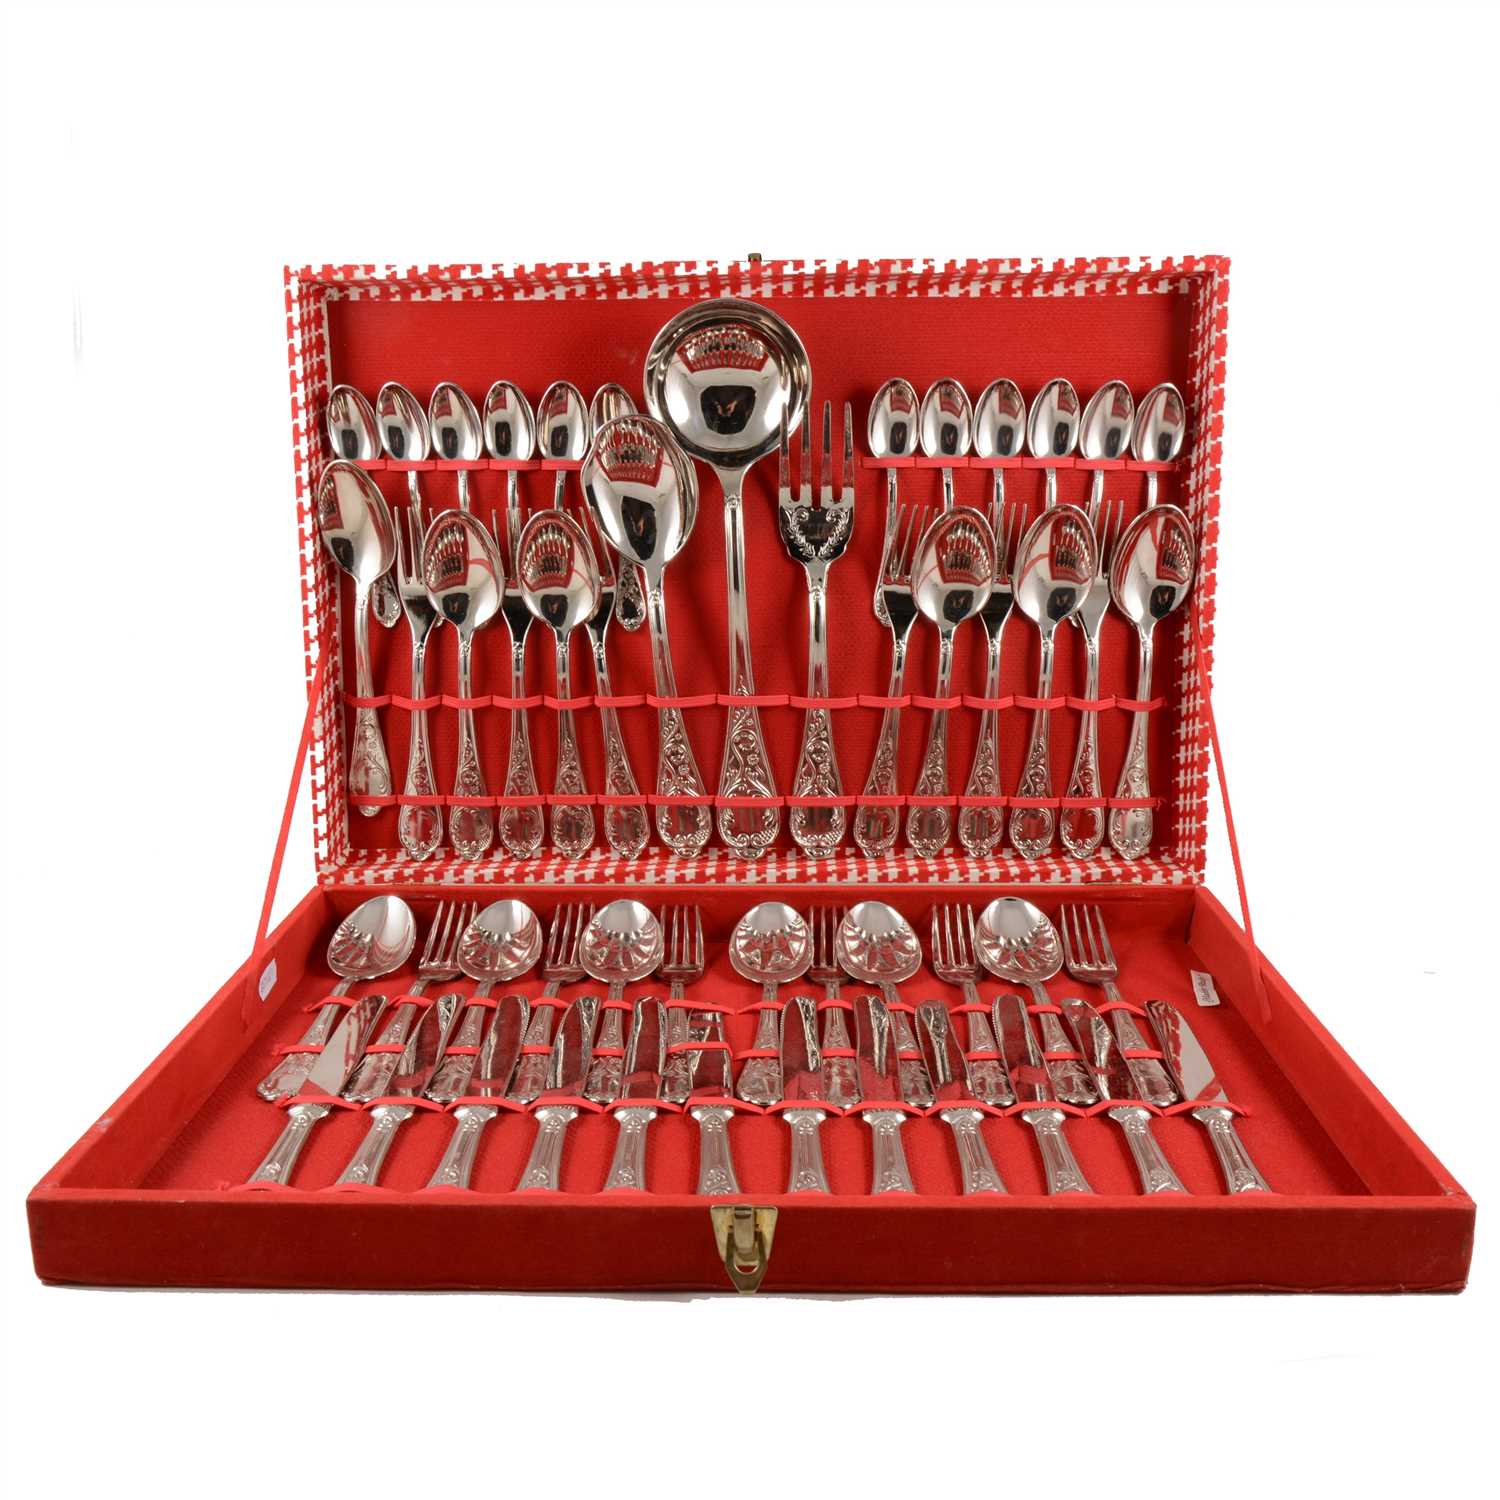 Lot 134 - A canteen of Italian silver-plated cutlery, 51 pieces, ornate handles.